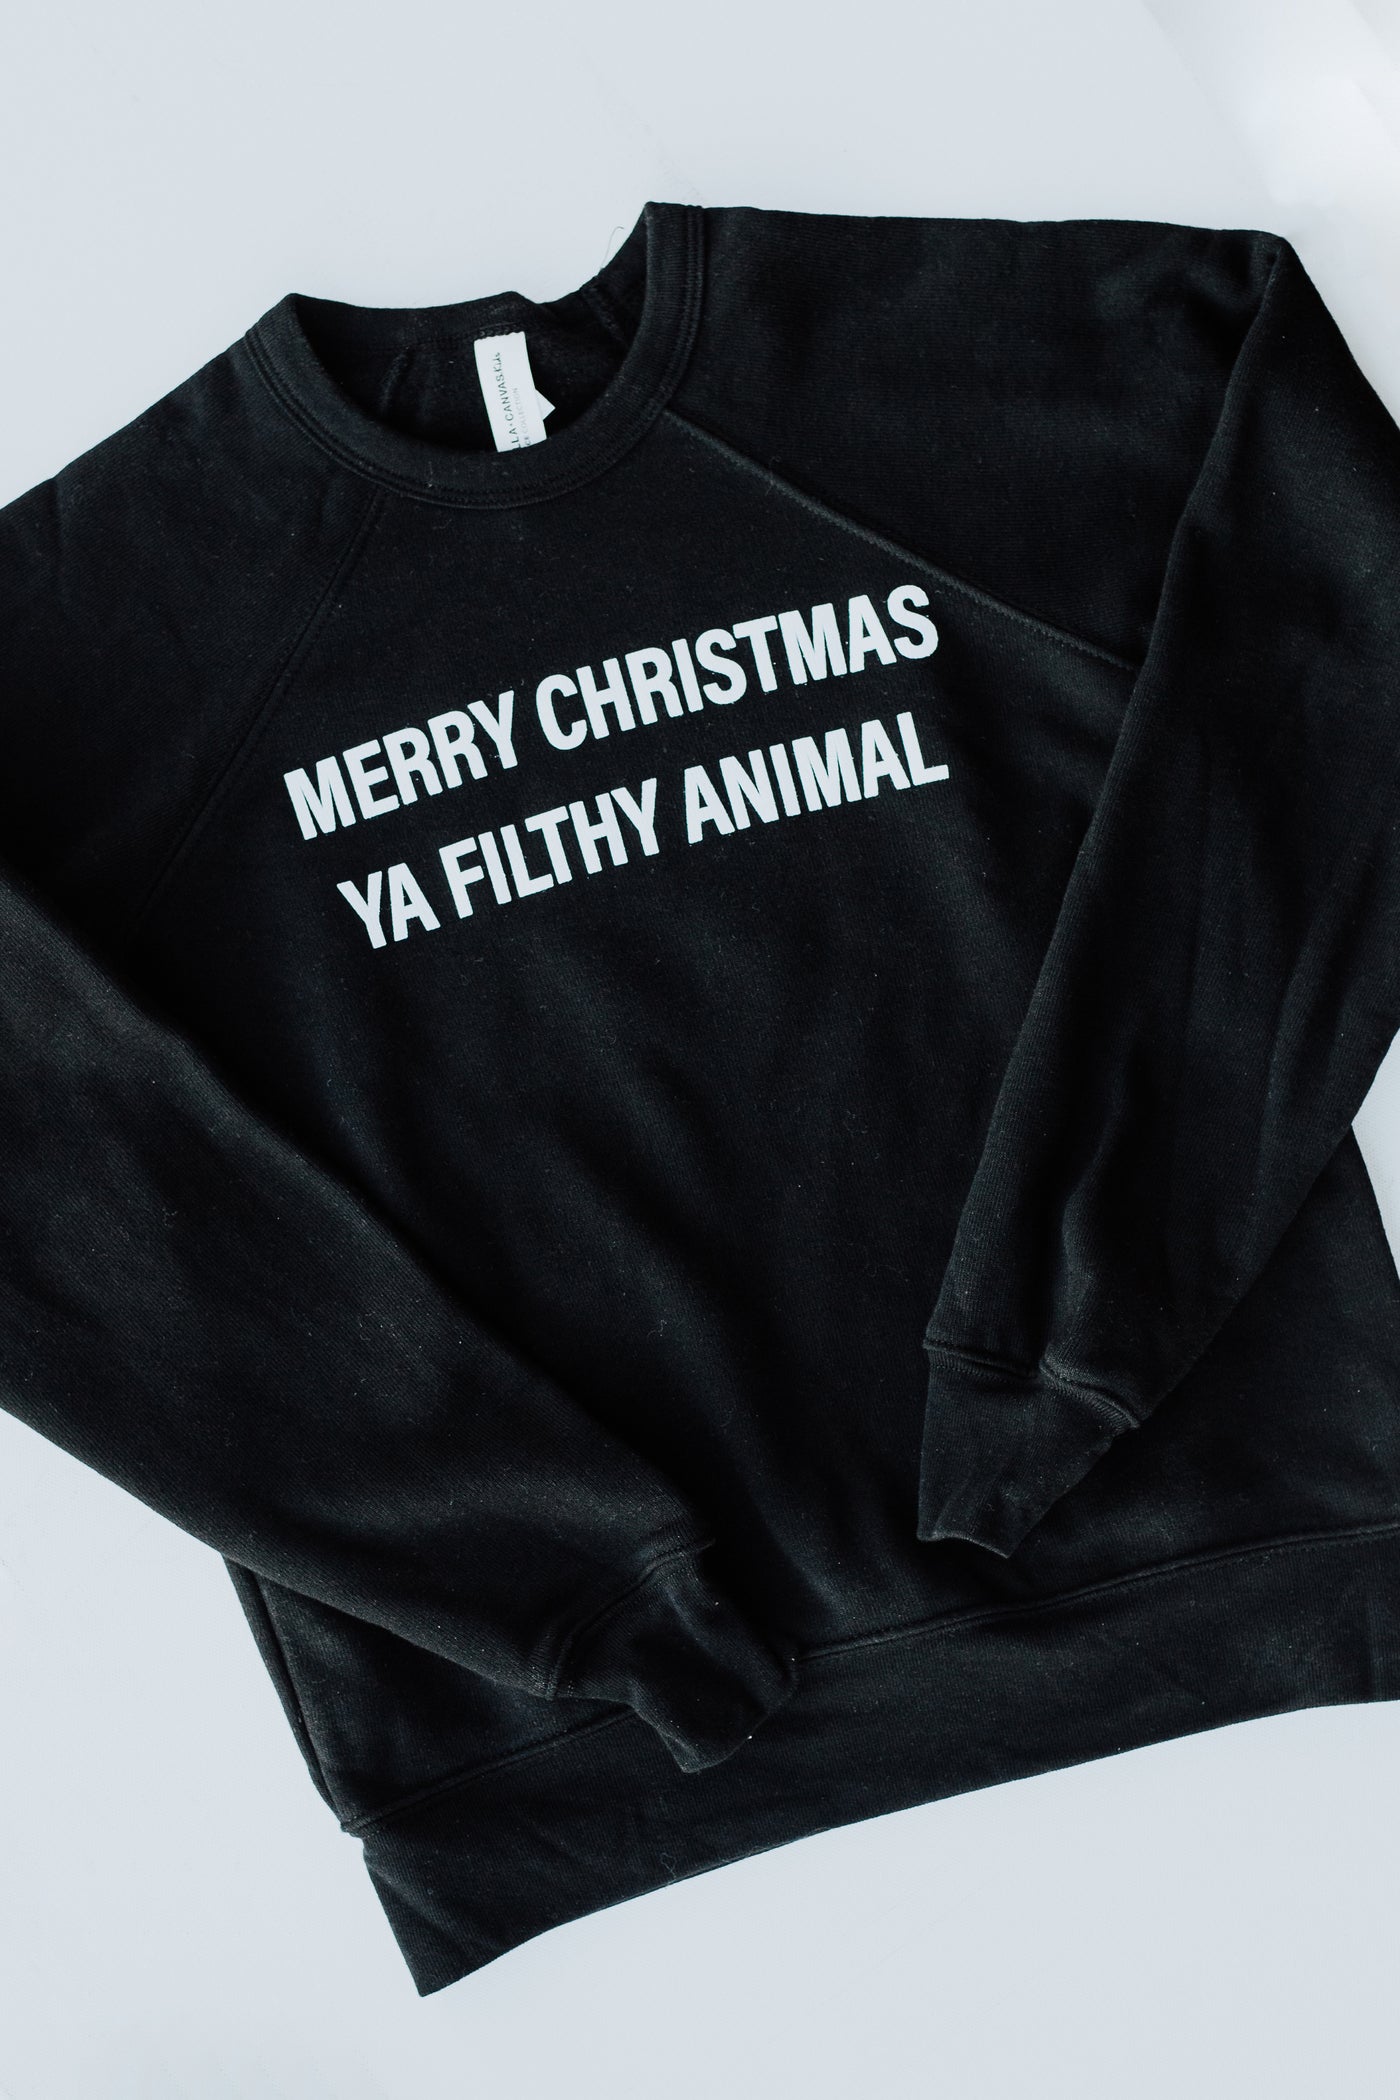 flat lay of the Youth Merry Christmas Ya Filthy Animal Pullover